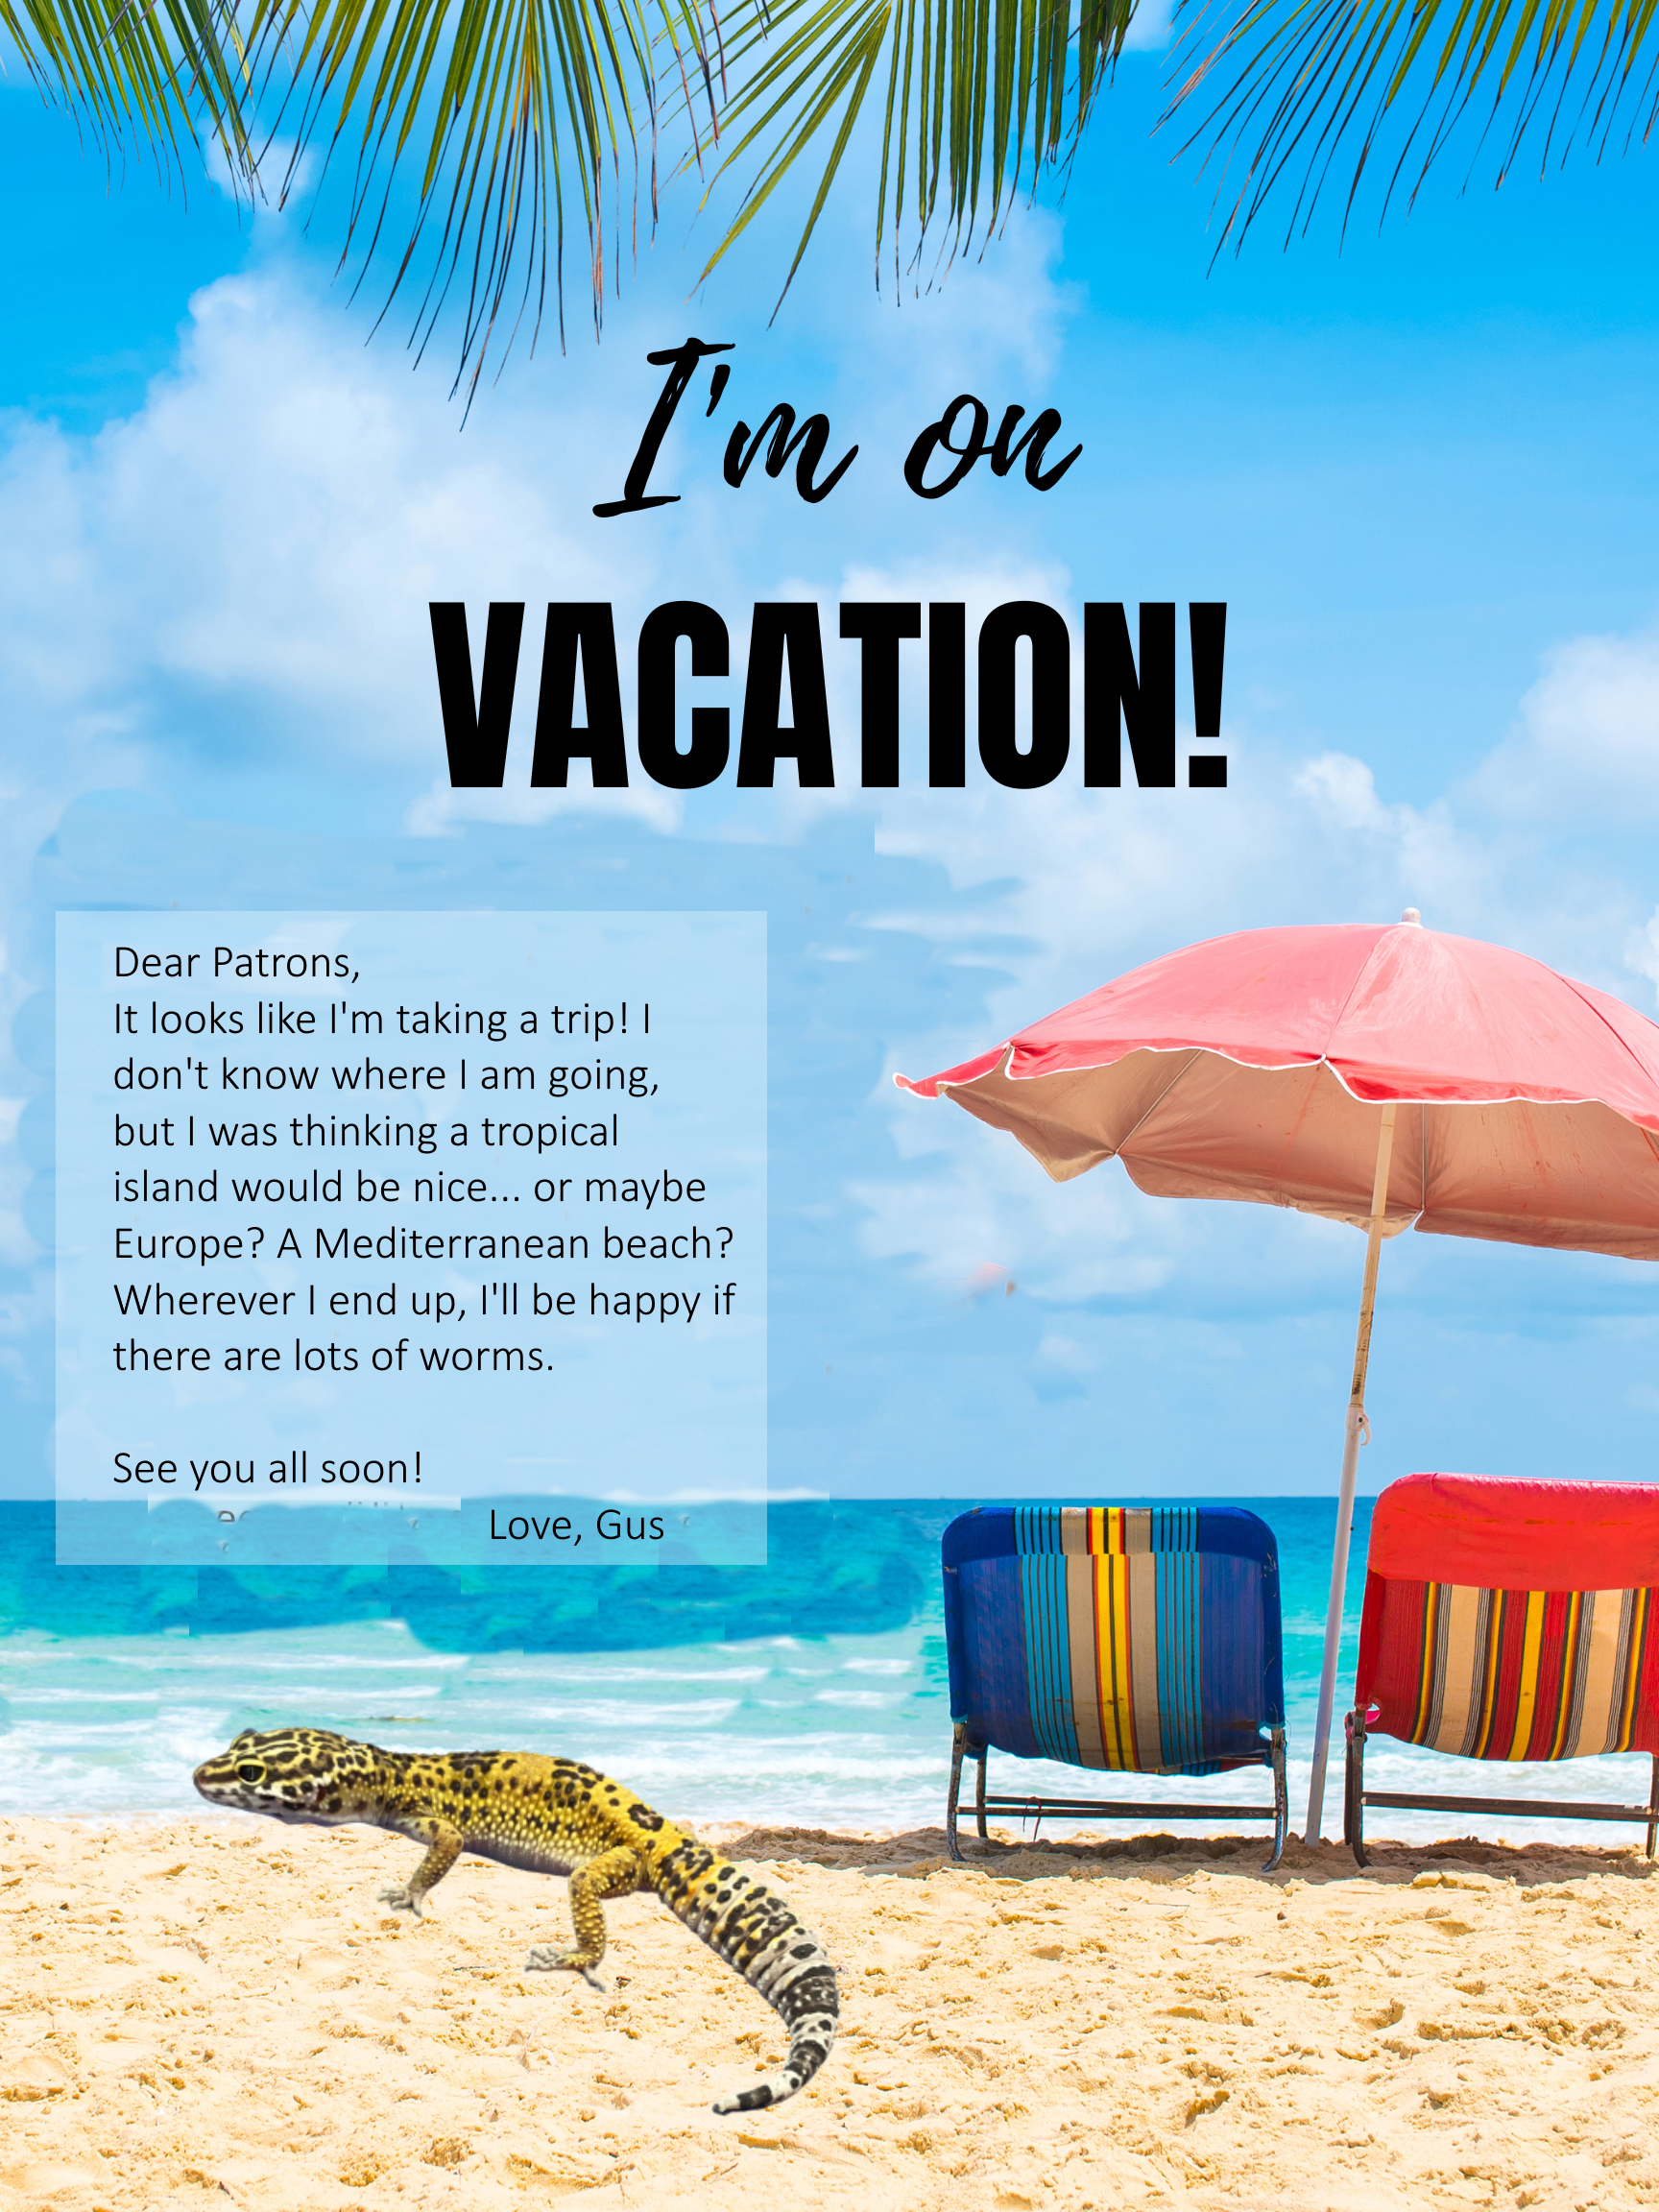 Gus on vacation image announcement